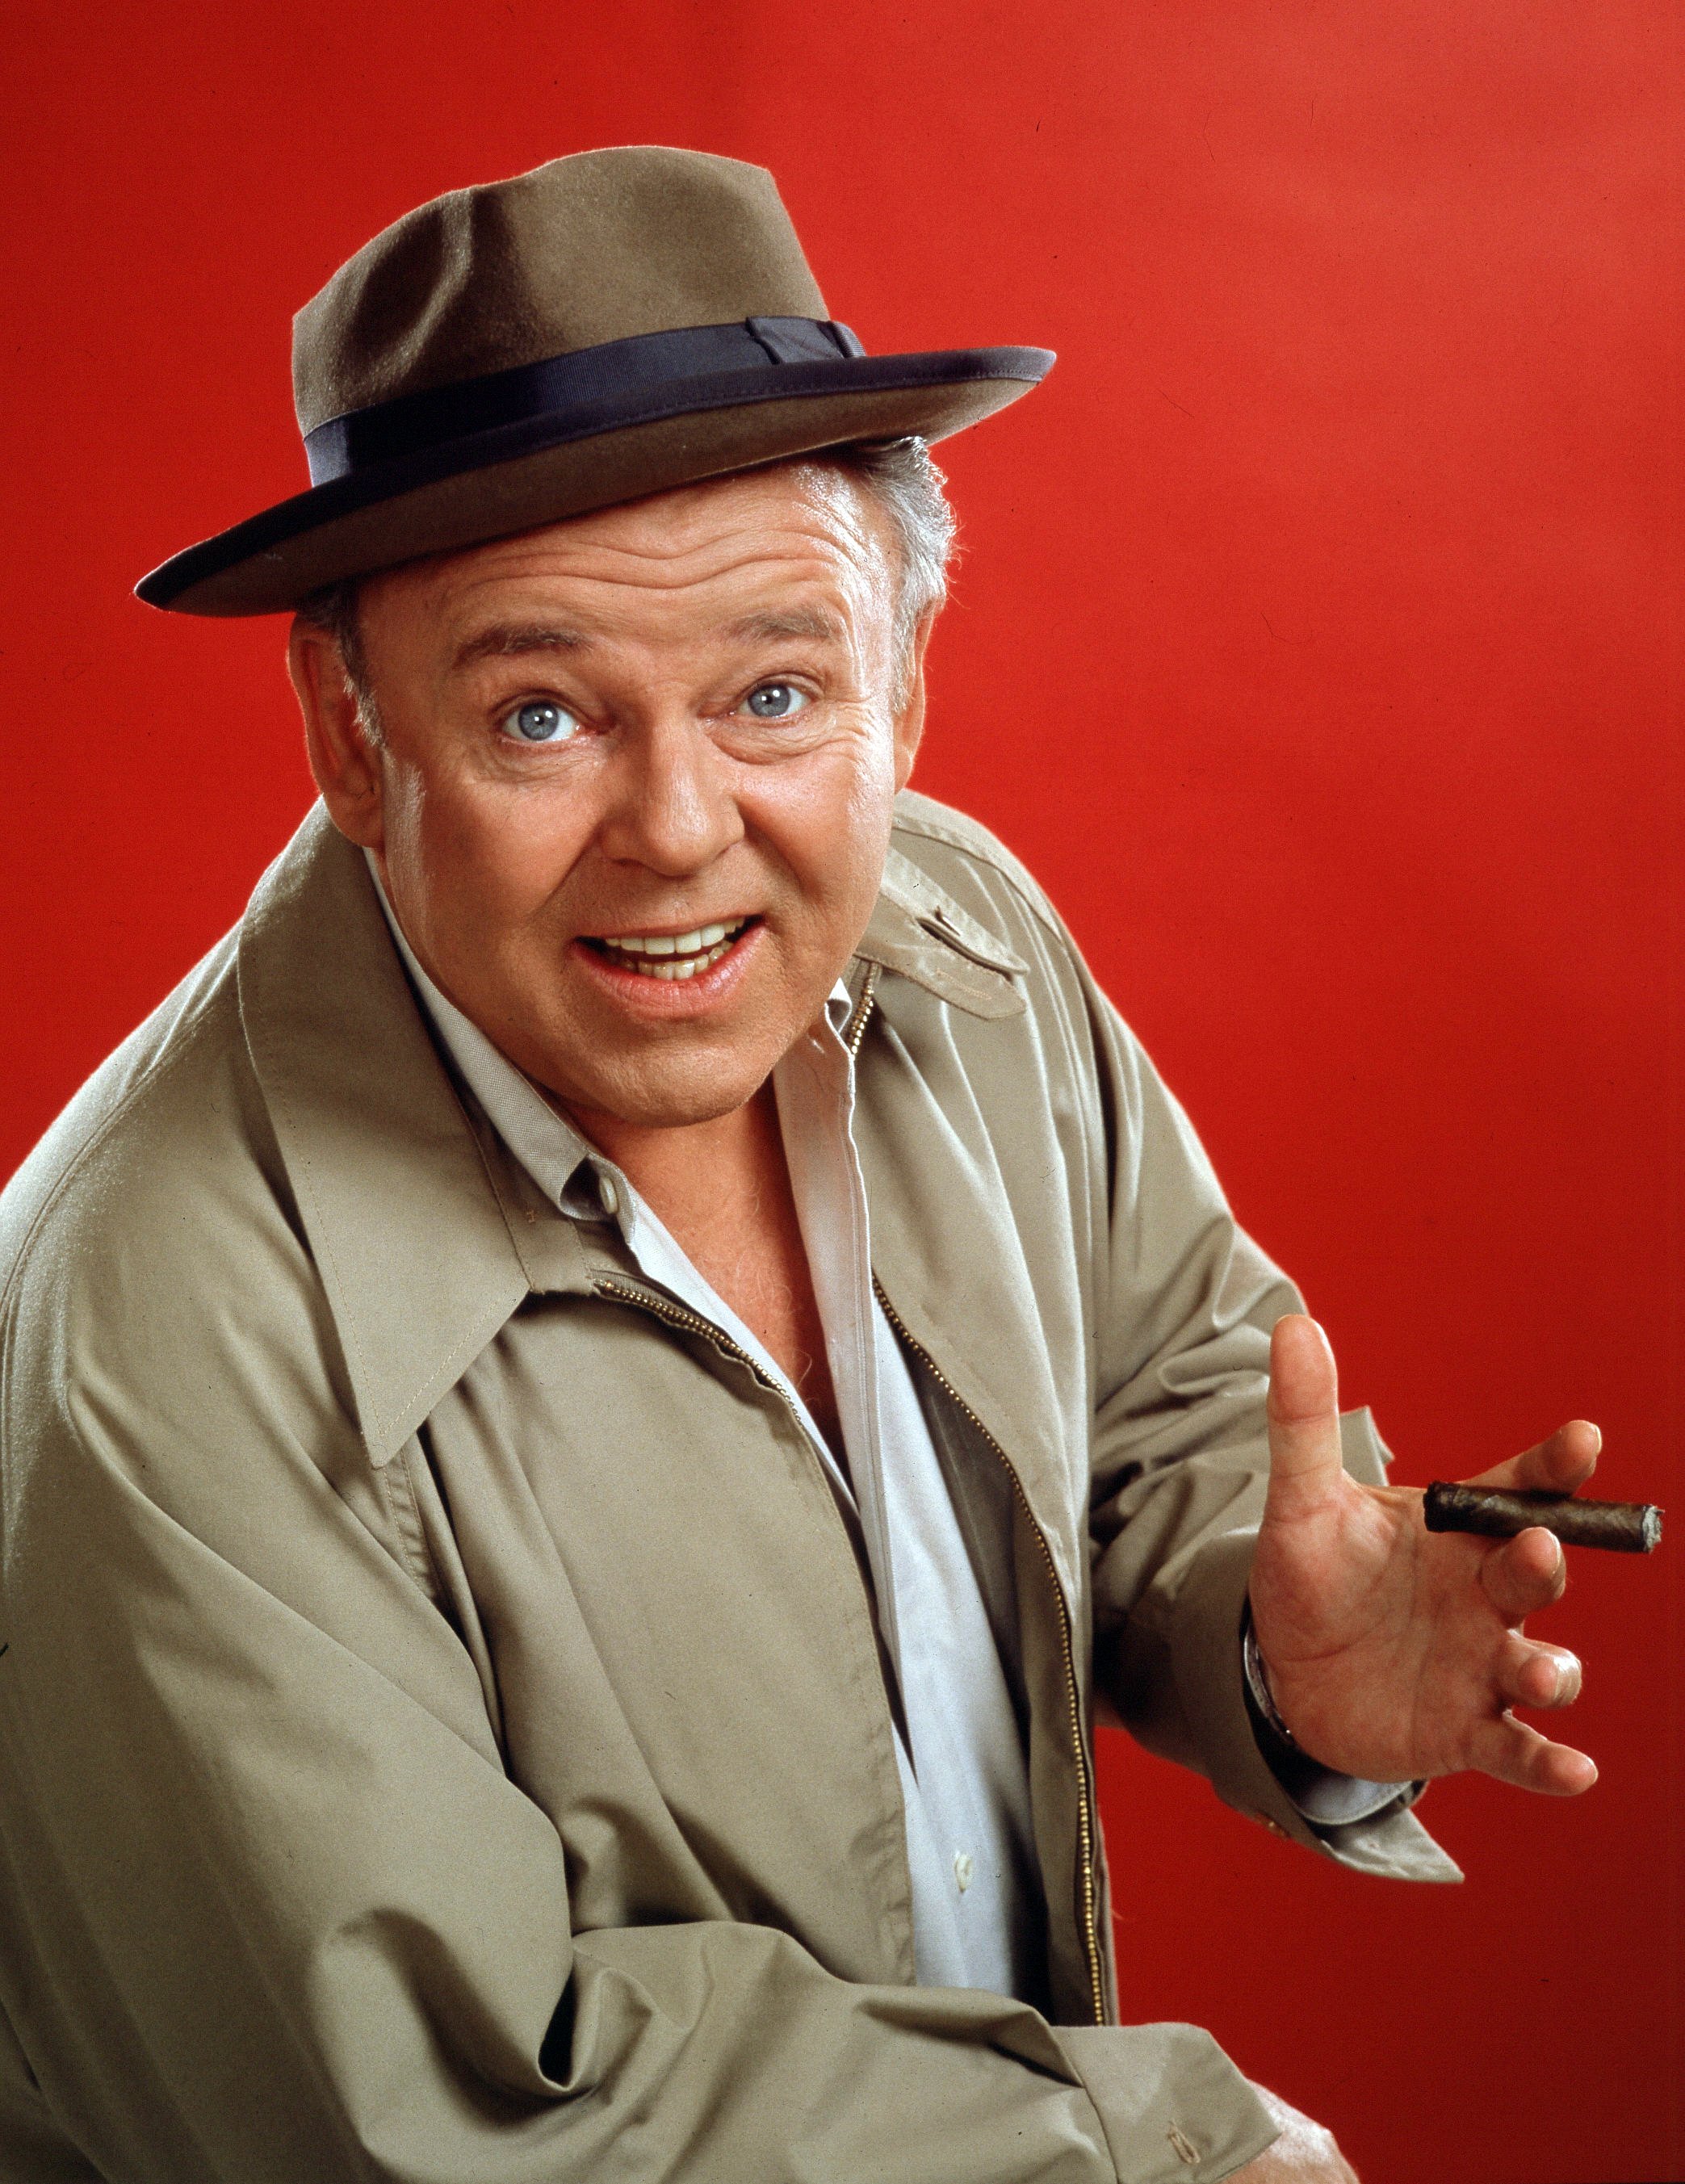 Actor Carroll O'Connor stars as Archie Bunker in the CBS television sitcom "All In The Family." | Source: Getty Images